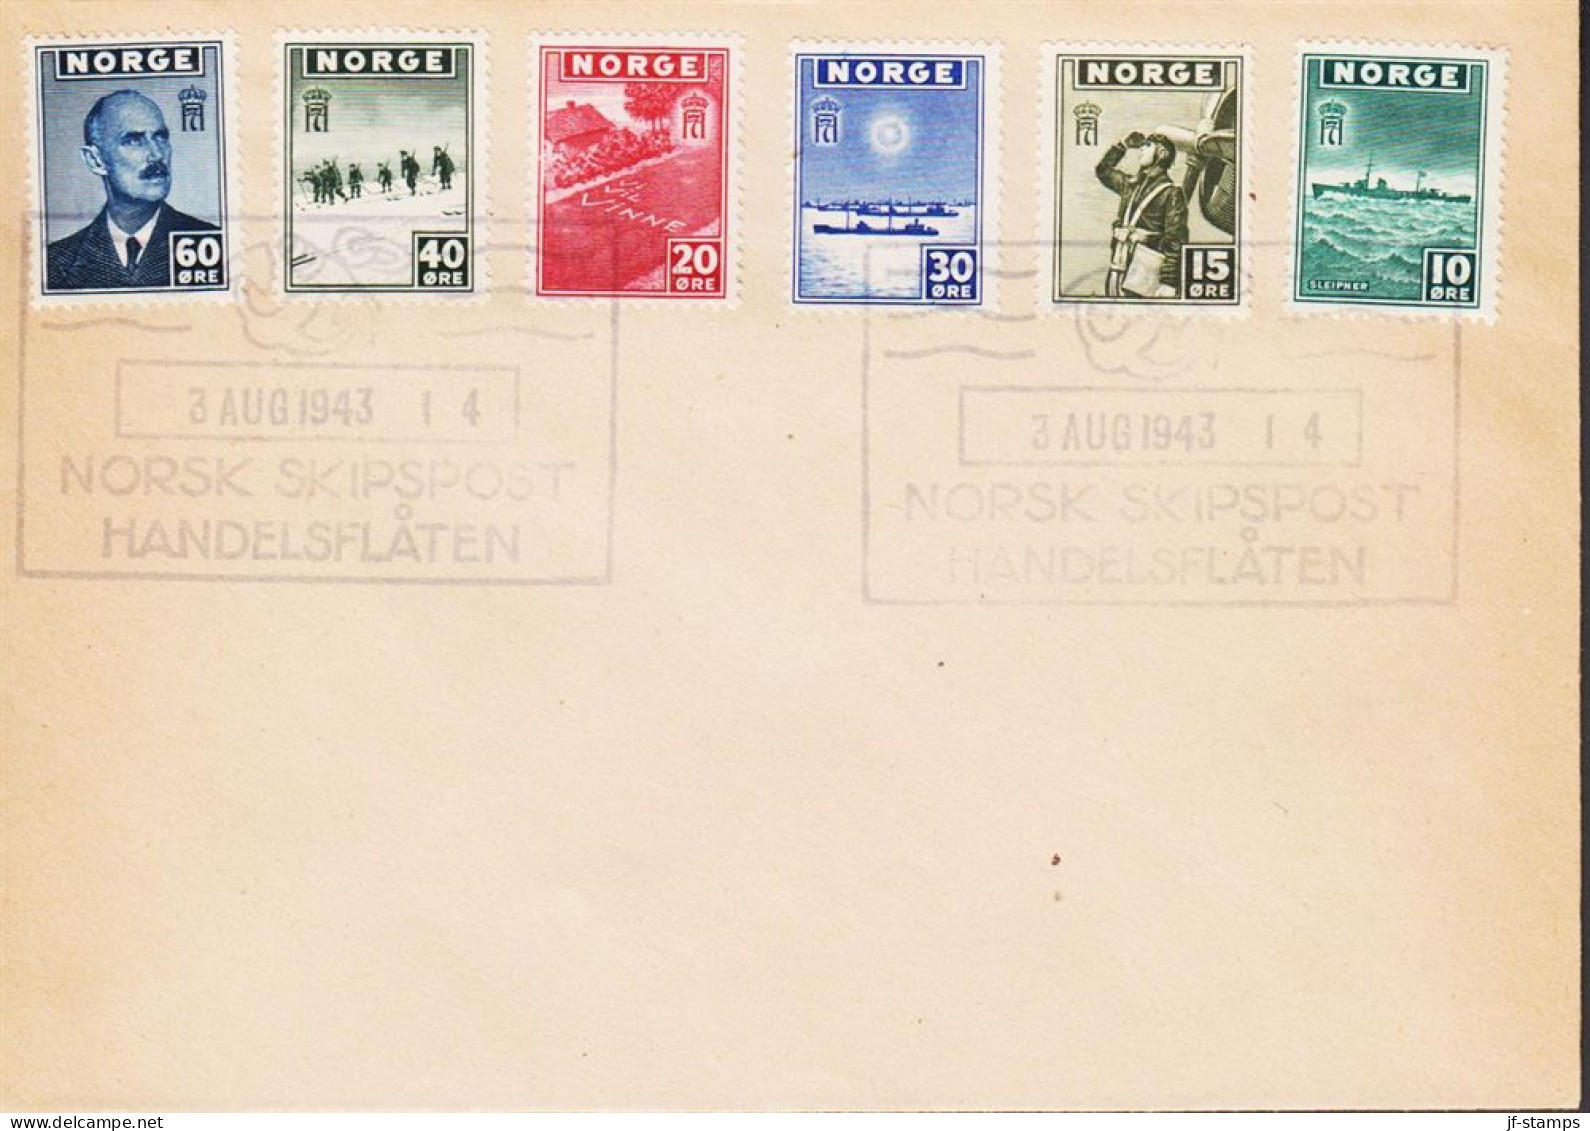 1943. NORGE. Fine Envelope With 10, 15, 20, 30 40 And 60 ØRE London Issue Cancelled With ... (Michel 278-283) - JF545675 - Covers & Documents